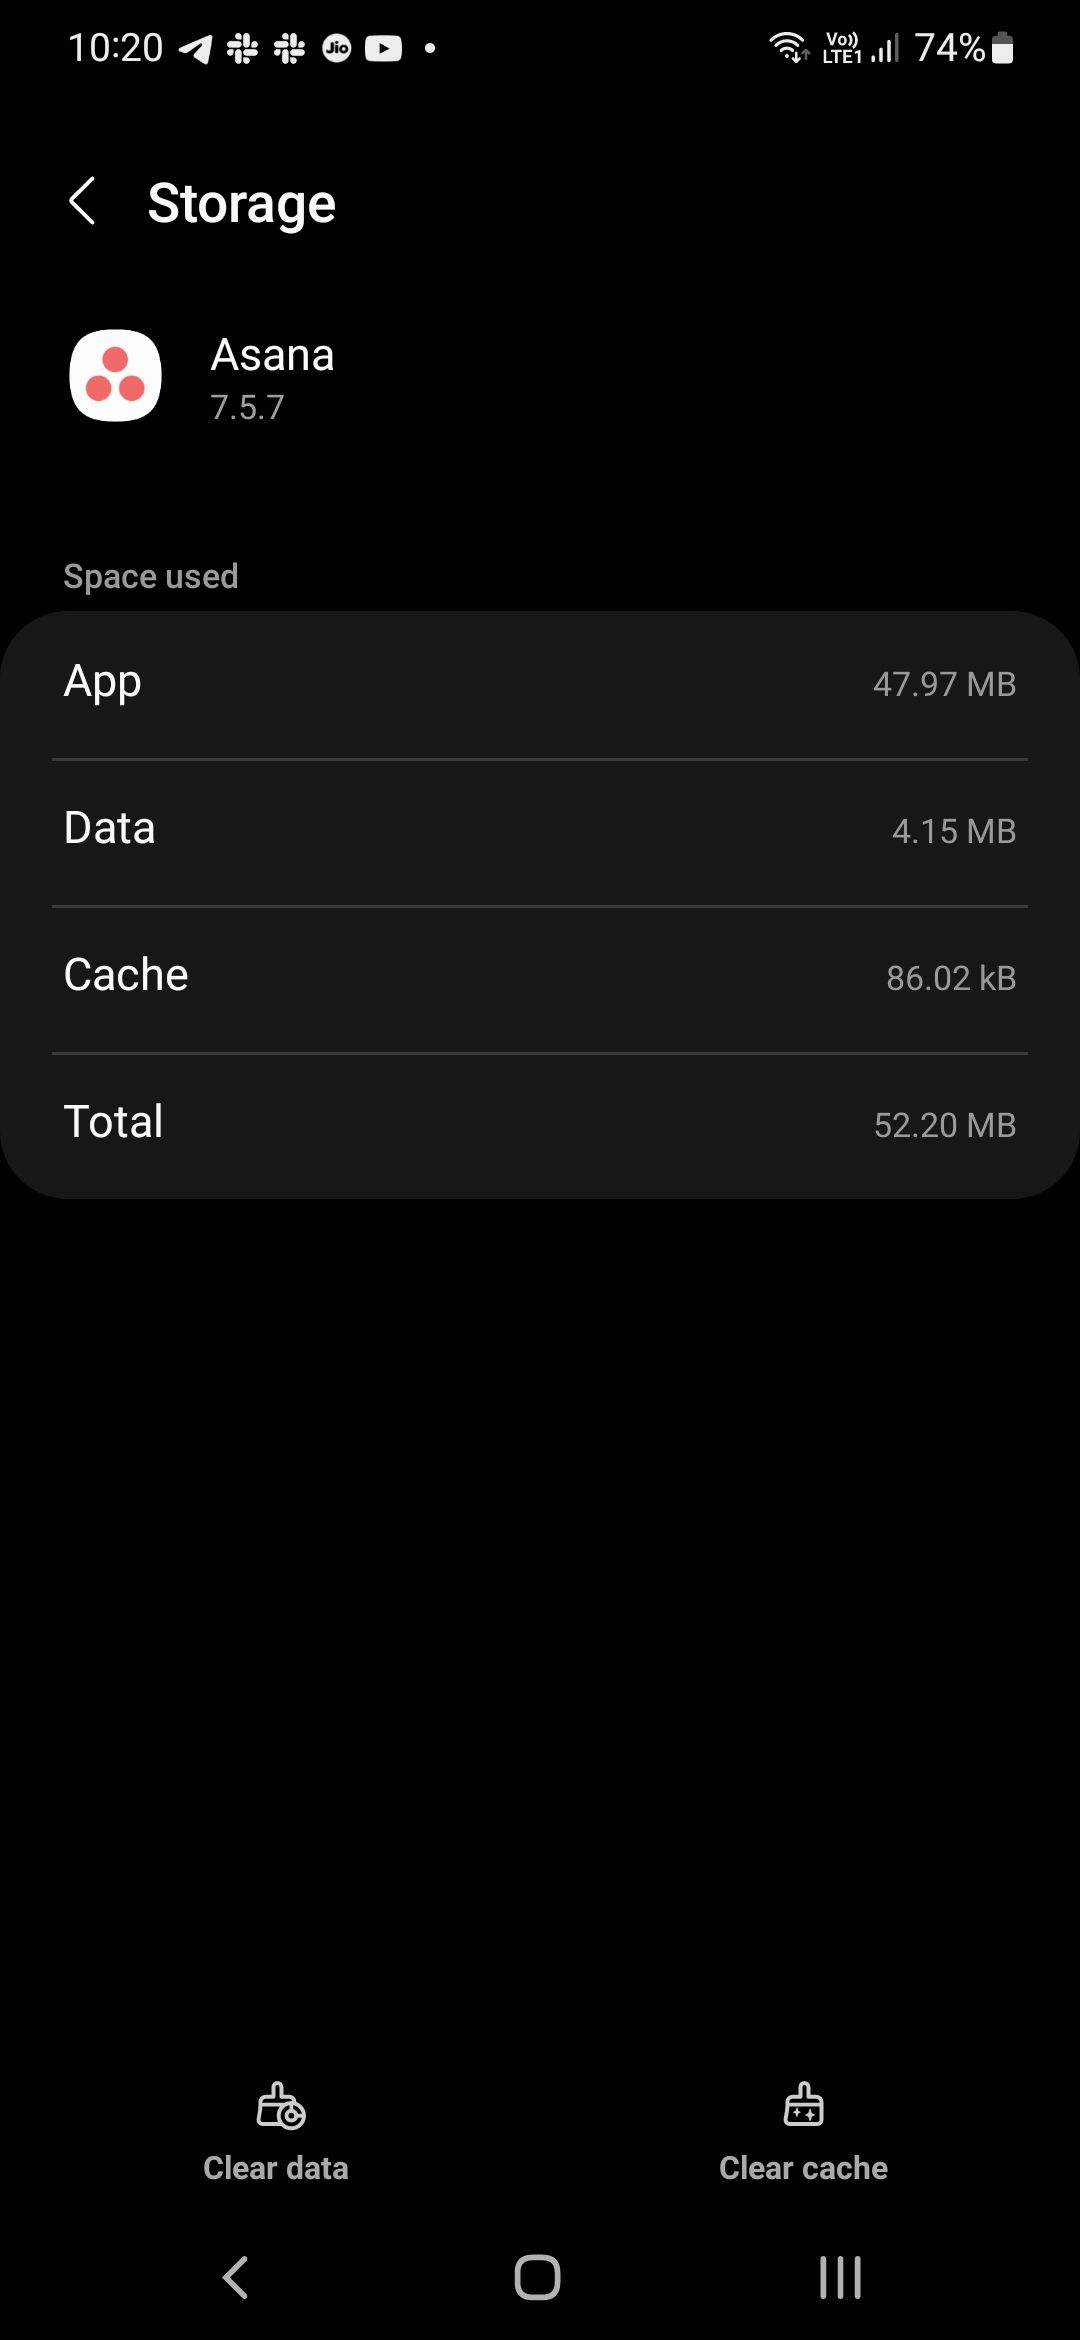 Screenshot shows storage settings for the Asana app. Clear data and Clear cache options are displayed at the bottom.